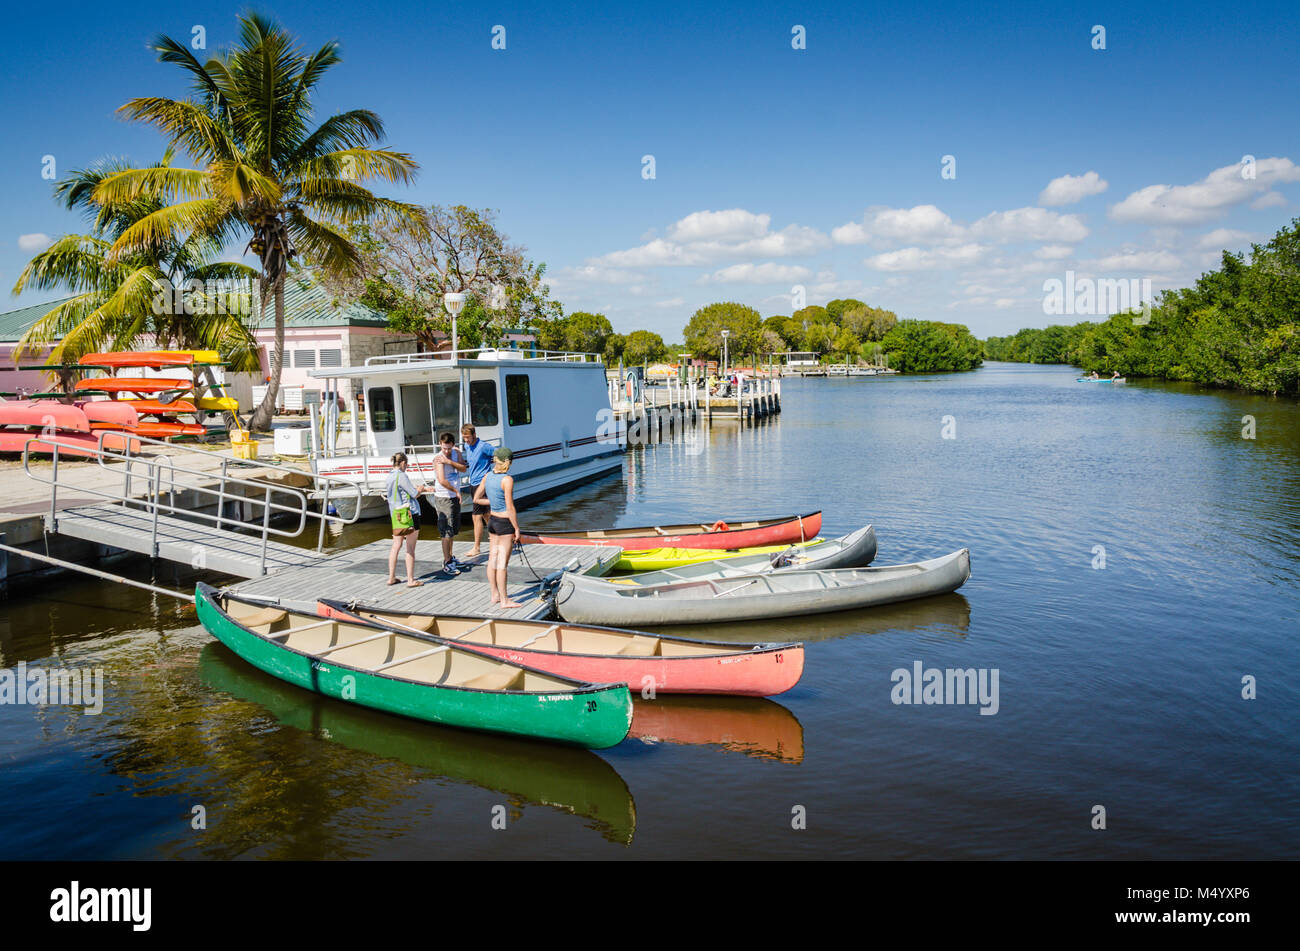 Colorful collection of canoes docked at pier on the bay in Biscayne National Park. Stock Photo